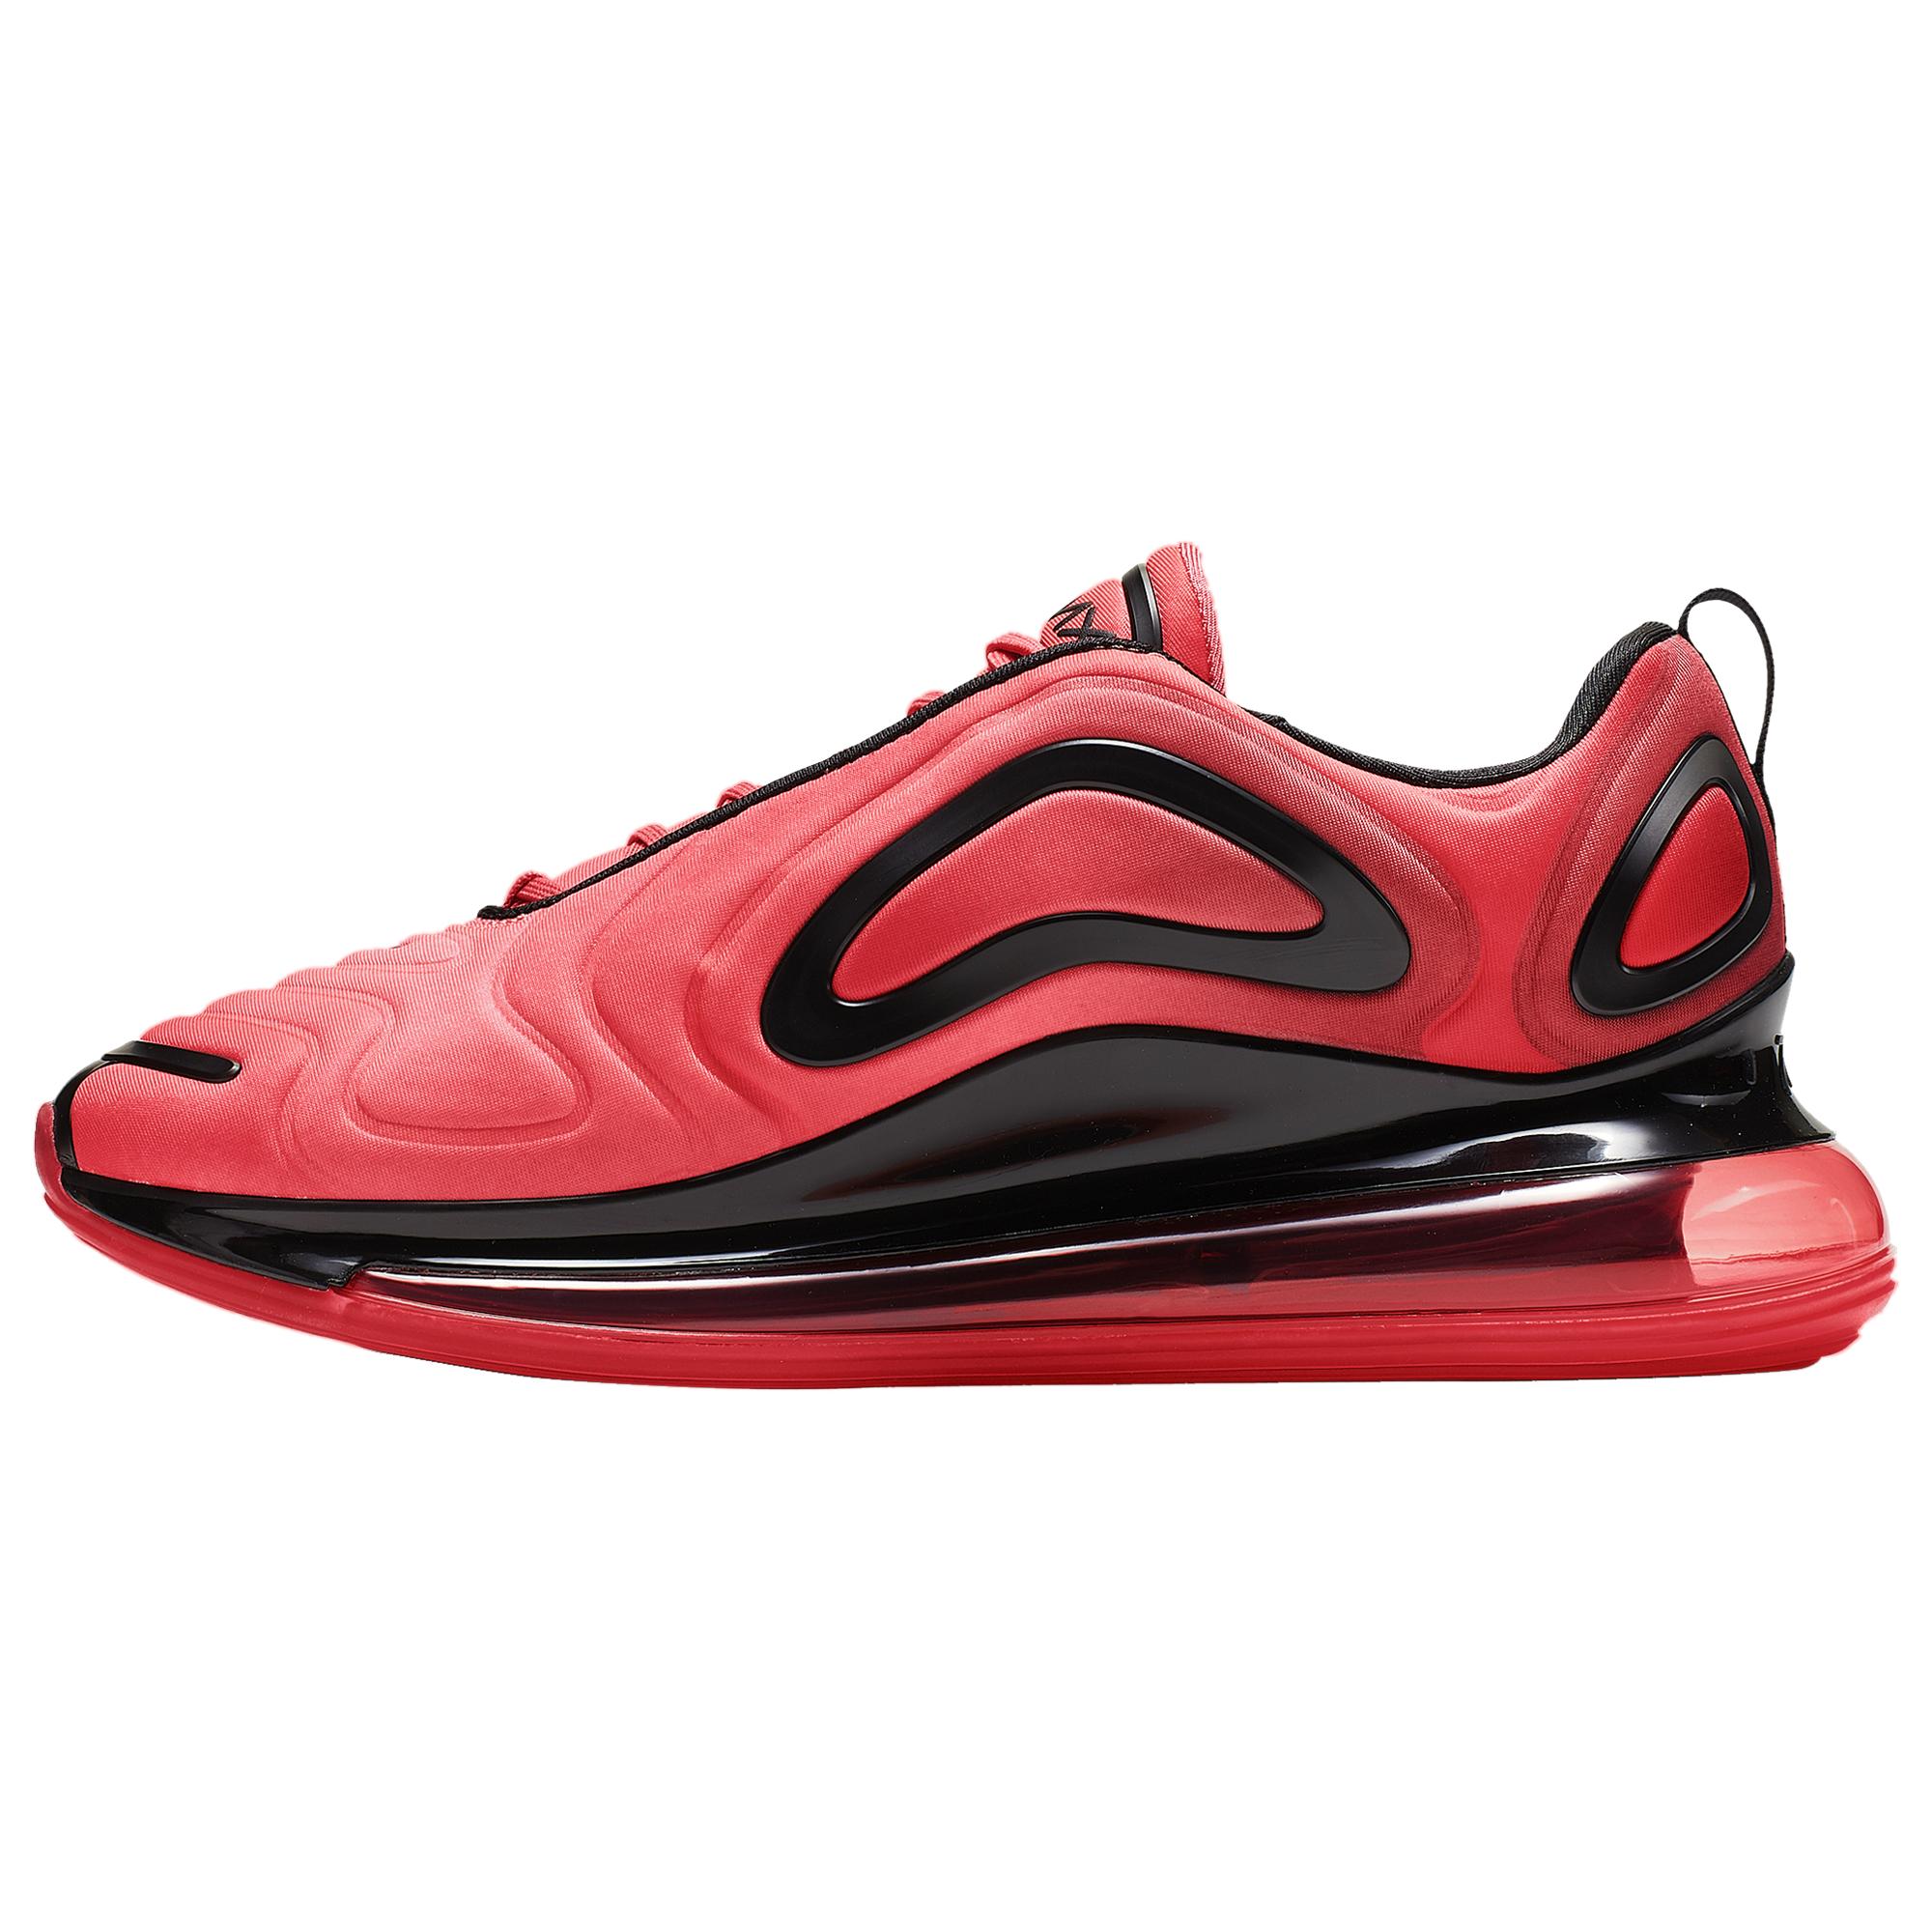 Nike Synthetic Air Max 720 in Red/Black (Red) for Men - Lyst